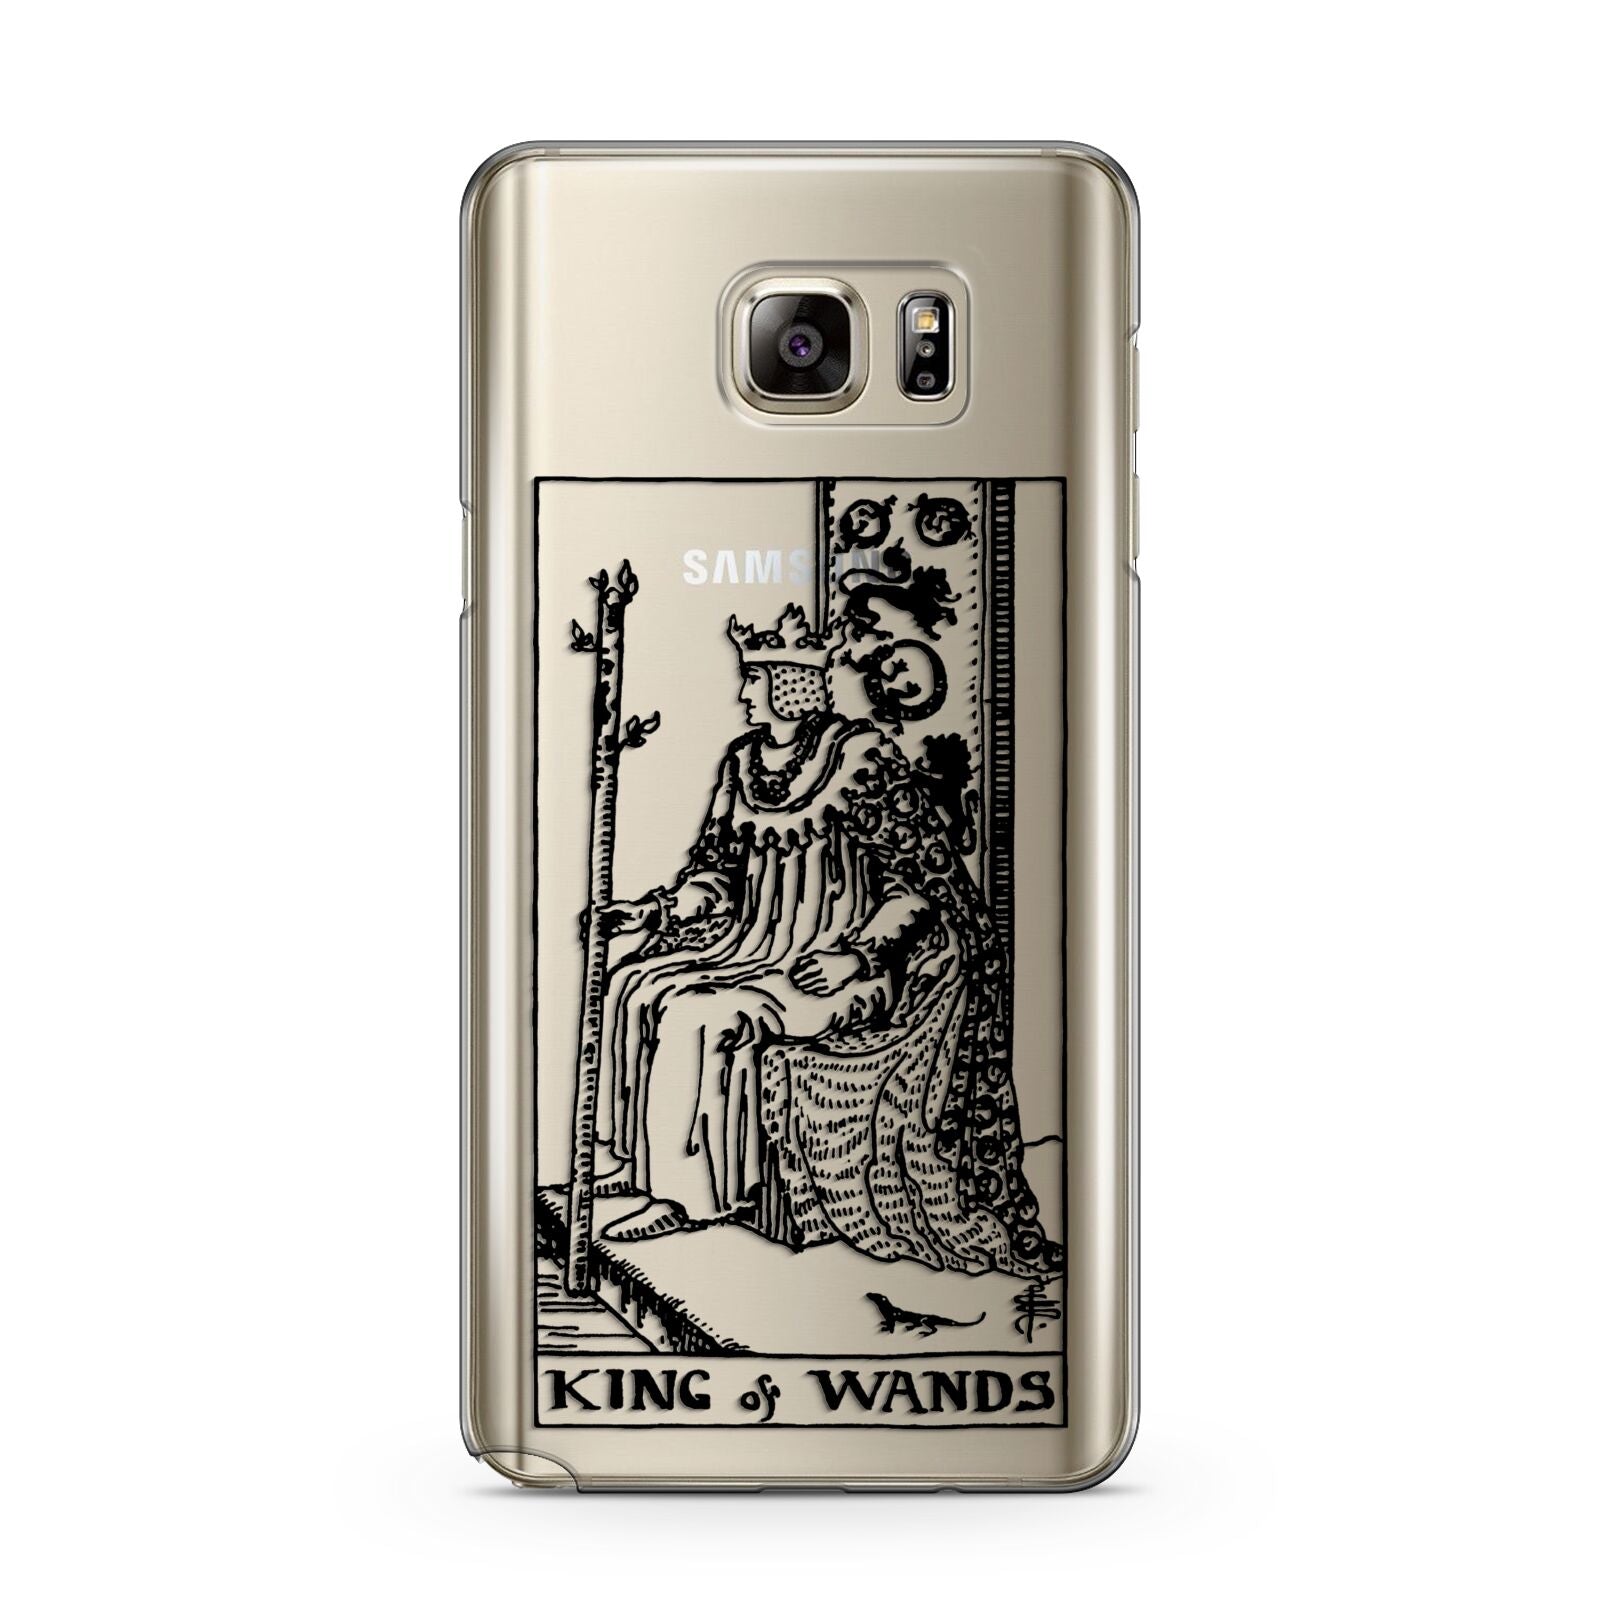 King of Wands Monochrome Samsung Galaxy Note 5 Case